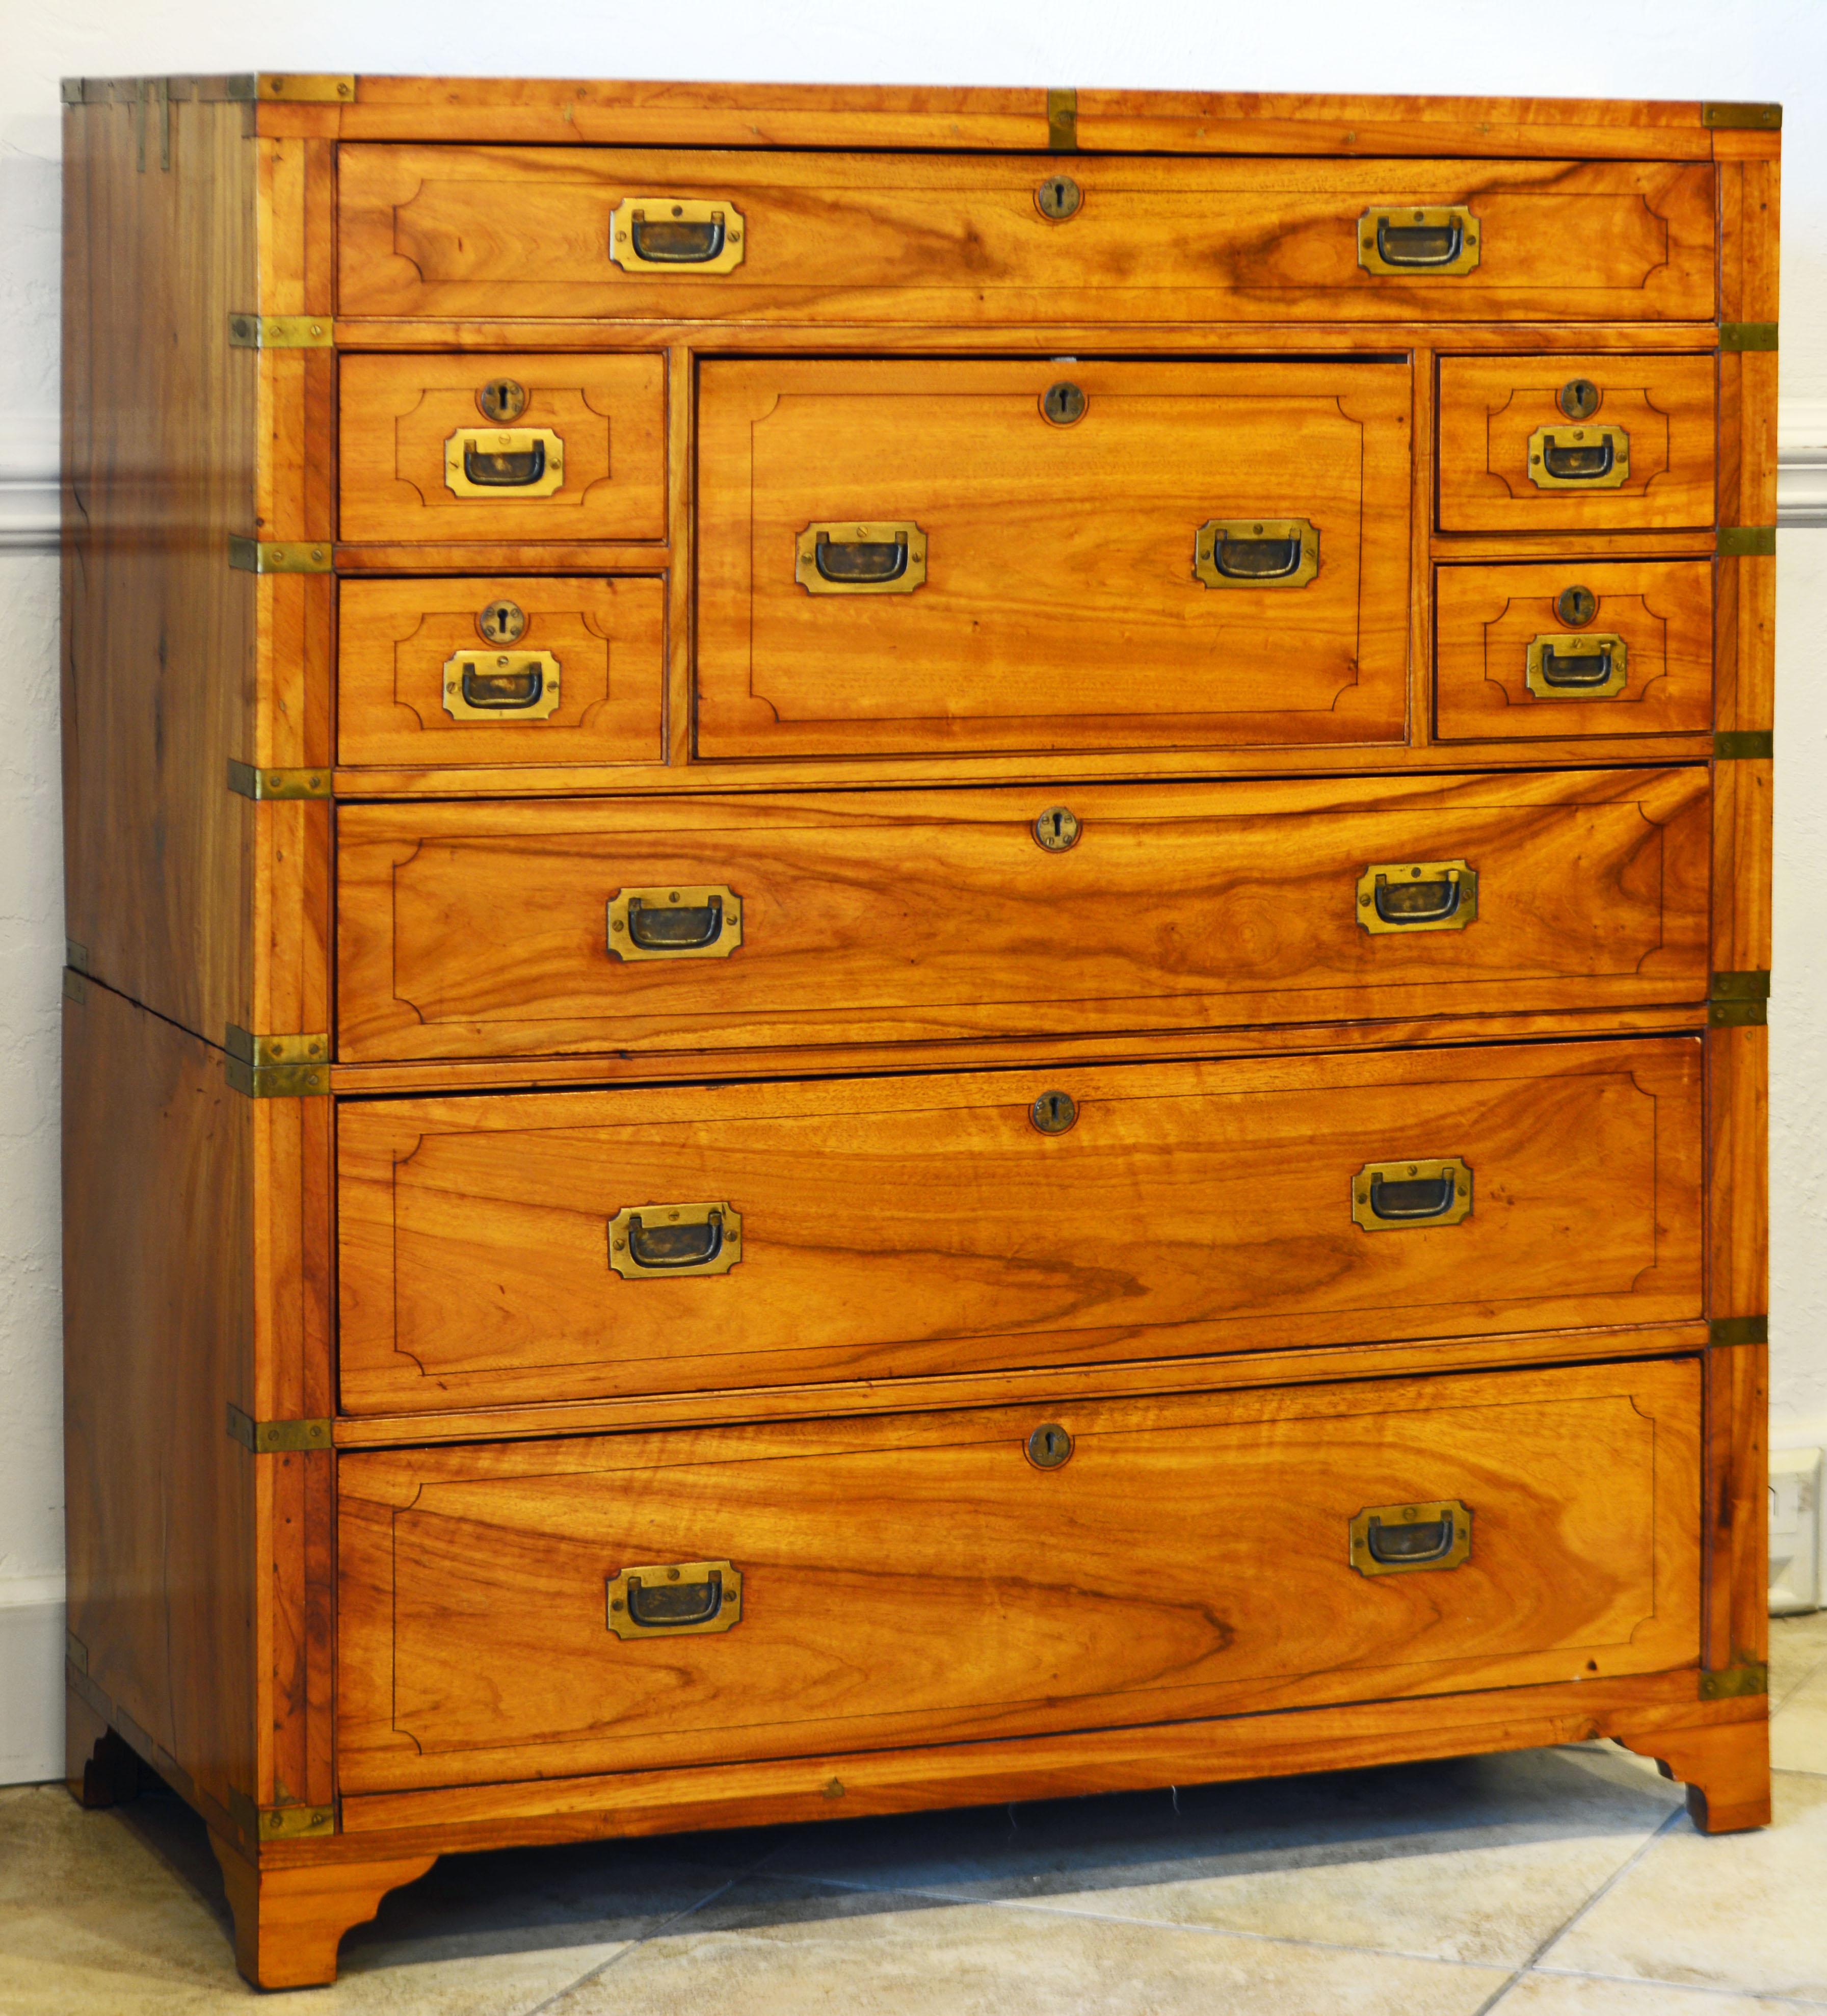 This superior campaign chest and secretaire displays the honey colored camphor wood in all its glory. It consists of an upper and a lower part with two long drawers. The upper part has two long drawers and four smaller drawers centering a pull out